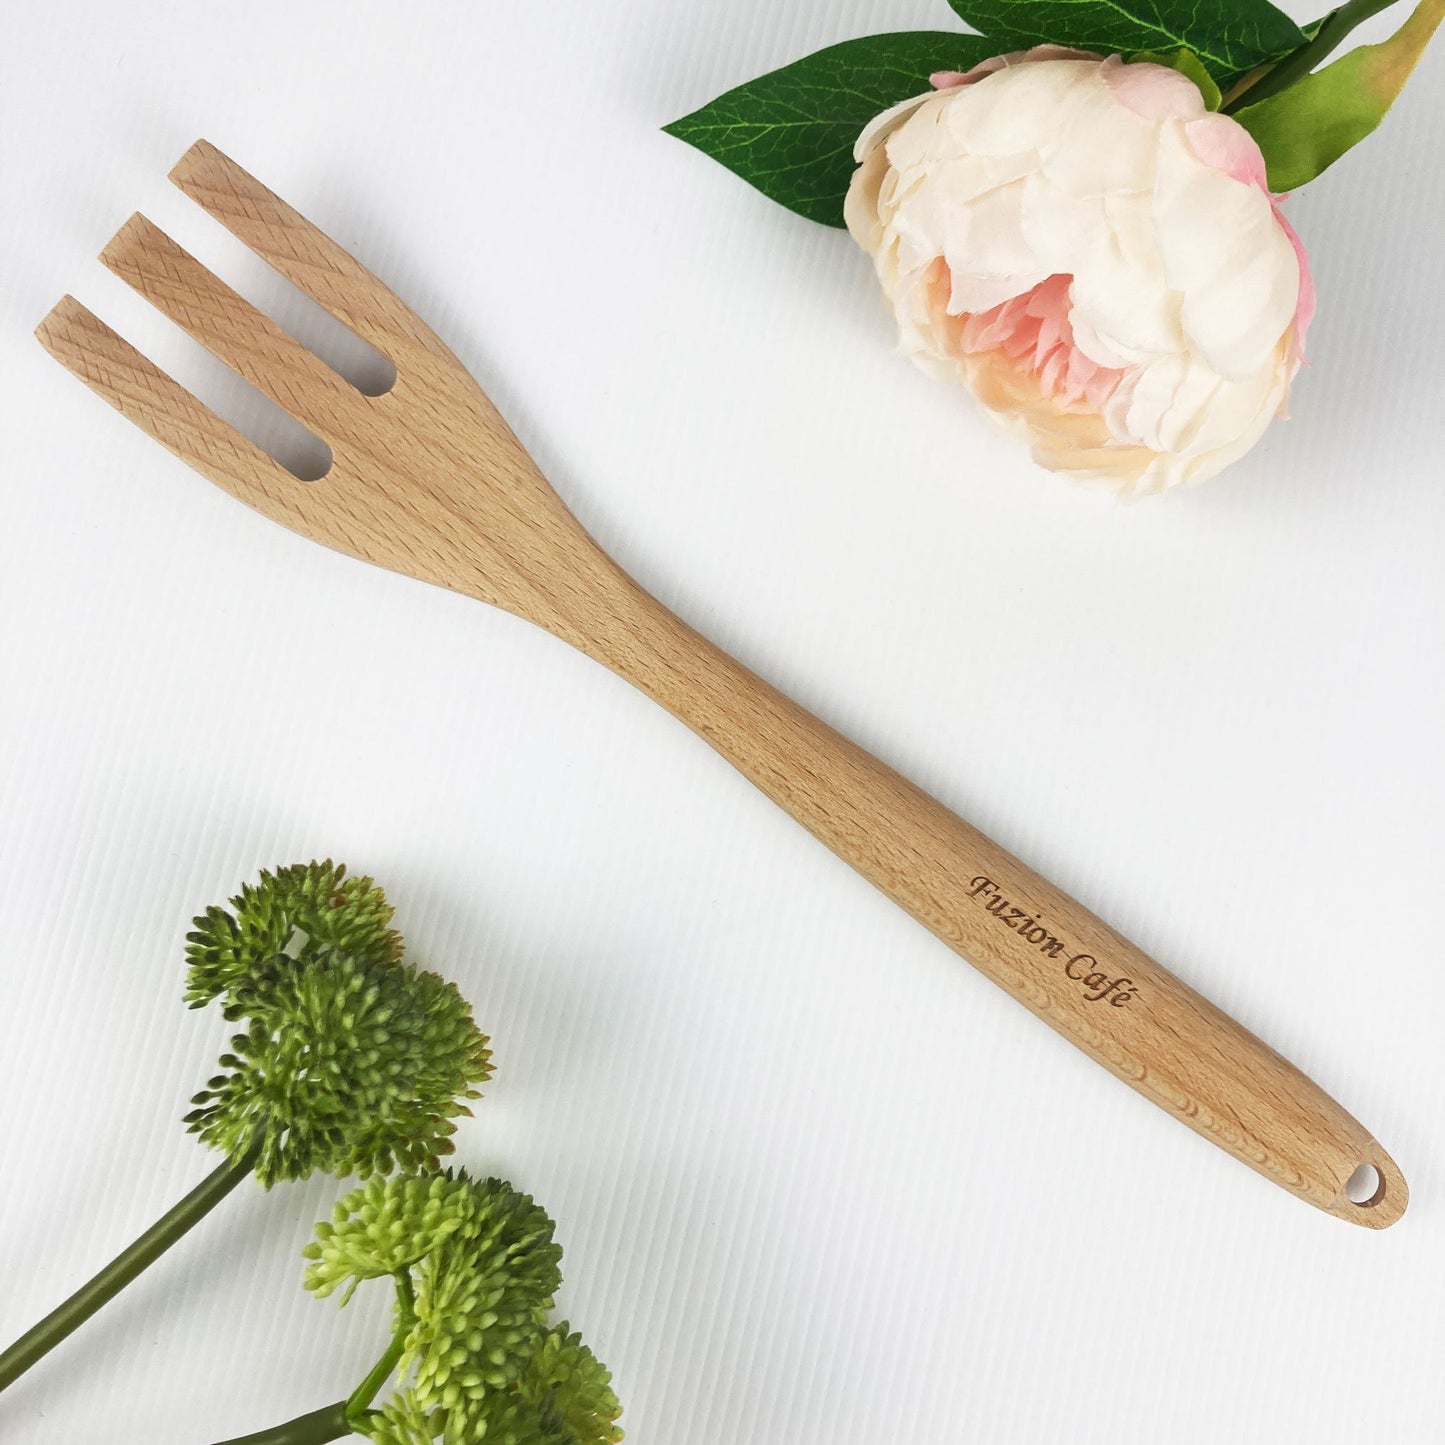 Engraved Wooden 3 Pieces Fork, Spoon or Flat Spoon Gift Set Wedding Favours Special Gift